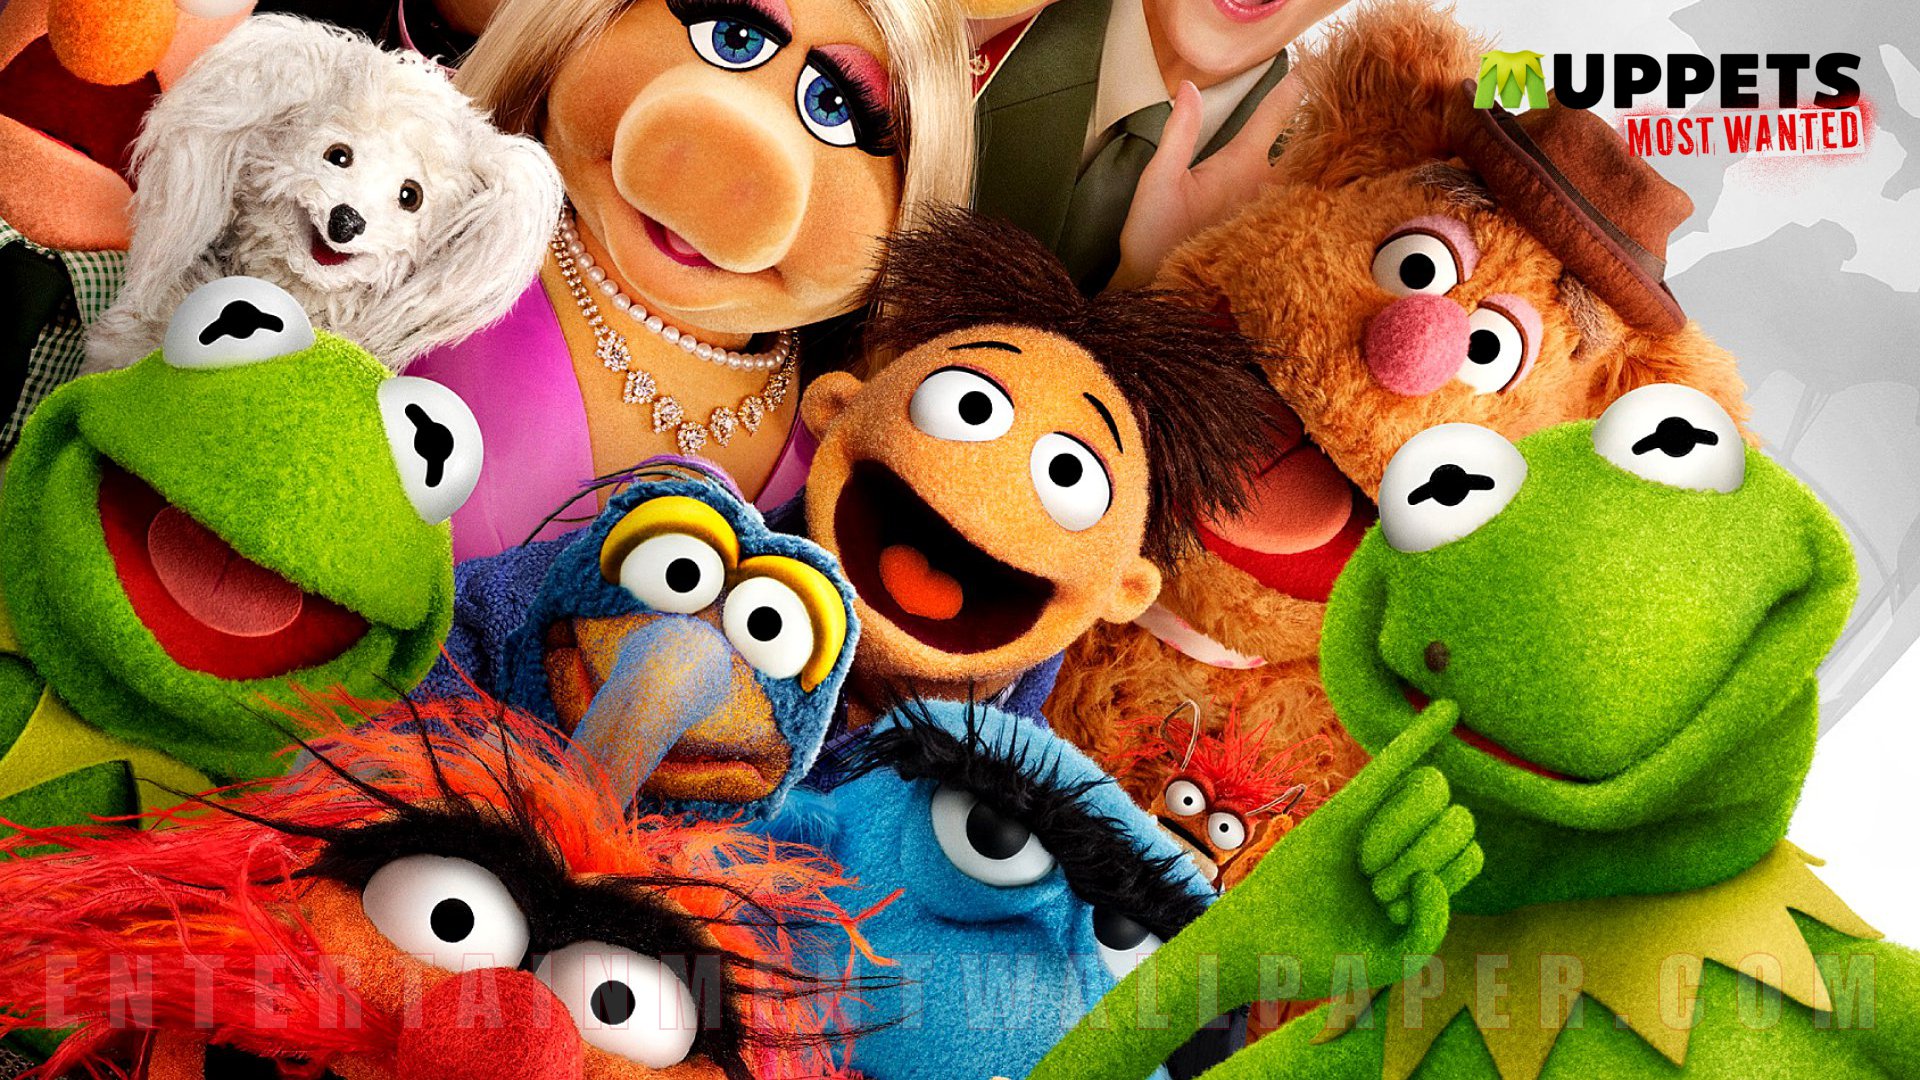 Muppets Most Wanted Wallpaper Size More